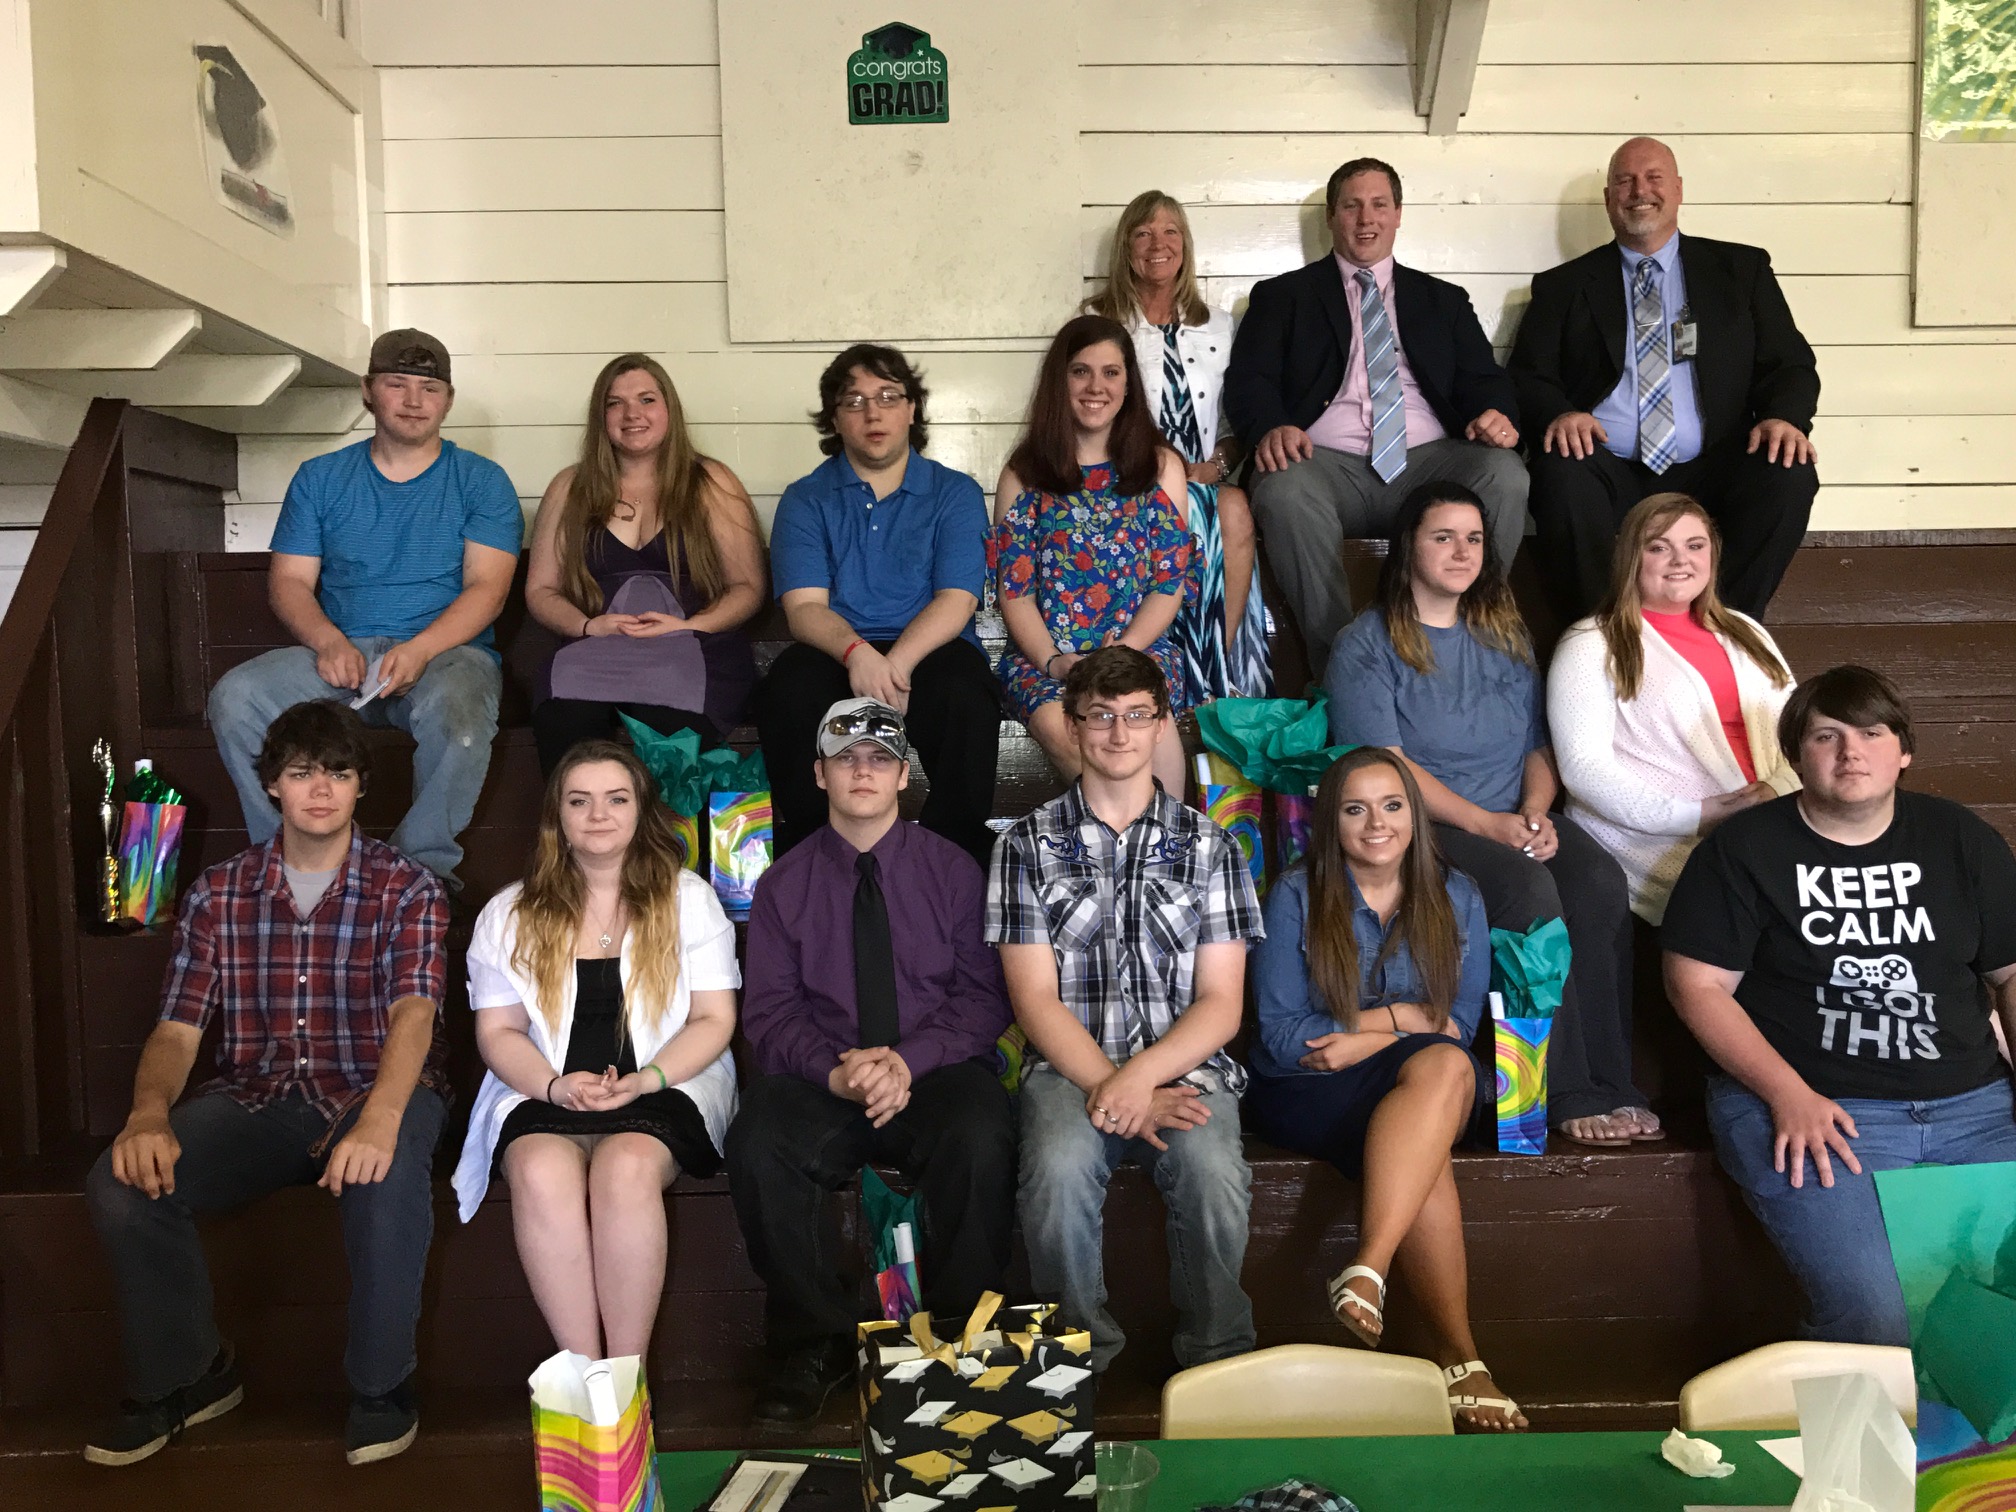 Burket 2017 Graduating Class. Front row left to right: Devin Robinson, Angie Denton, Brent Hyde, Timothy Mollette, Jenny Wadkins, Josie Forney, Patricia Rudolph, Dale Wallace Back row left to right: Braxton Mollett, Abby Poe, Dewey Gayheart, Katherine Heckman, Staff Member Angela Woodward, Instructor Micah Lukens, TVHS Assistant Principal Jon Hutton Not pictured: Angel Howe, Riley Reichard, Christian Nine, Alexis Shelpman, Amanda Shepherd